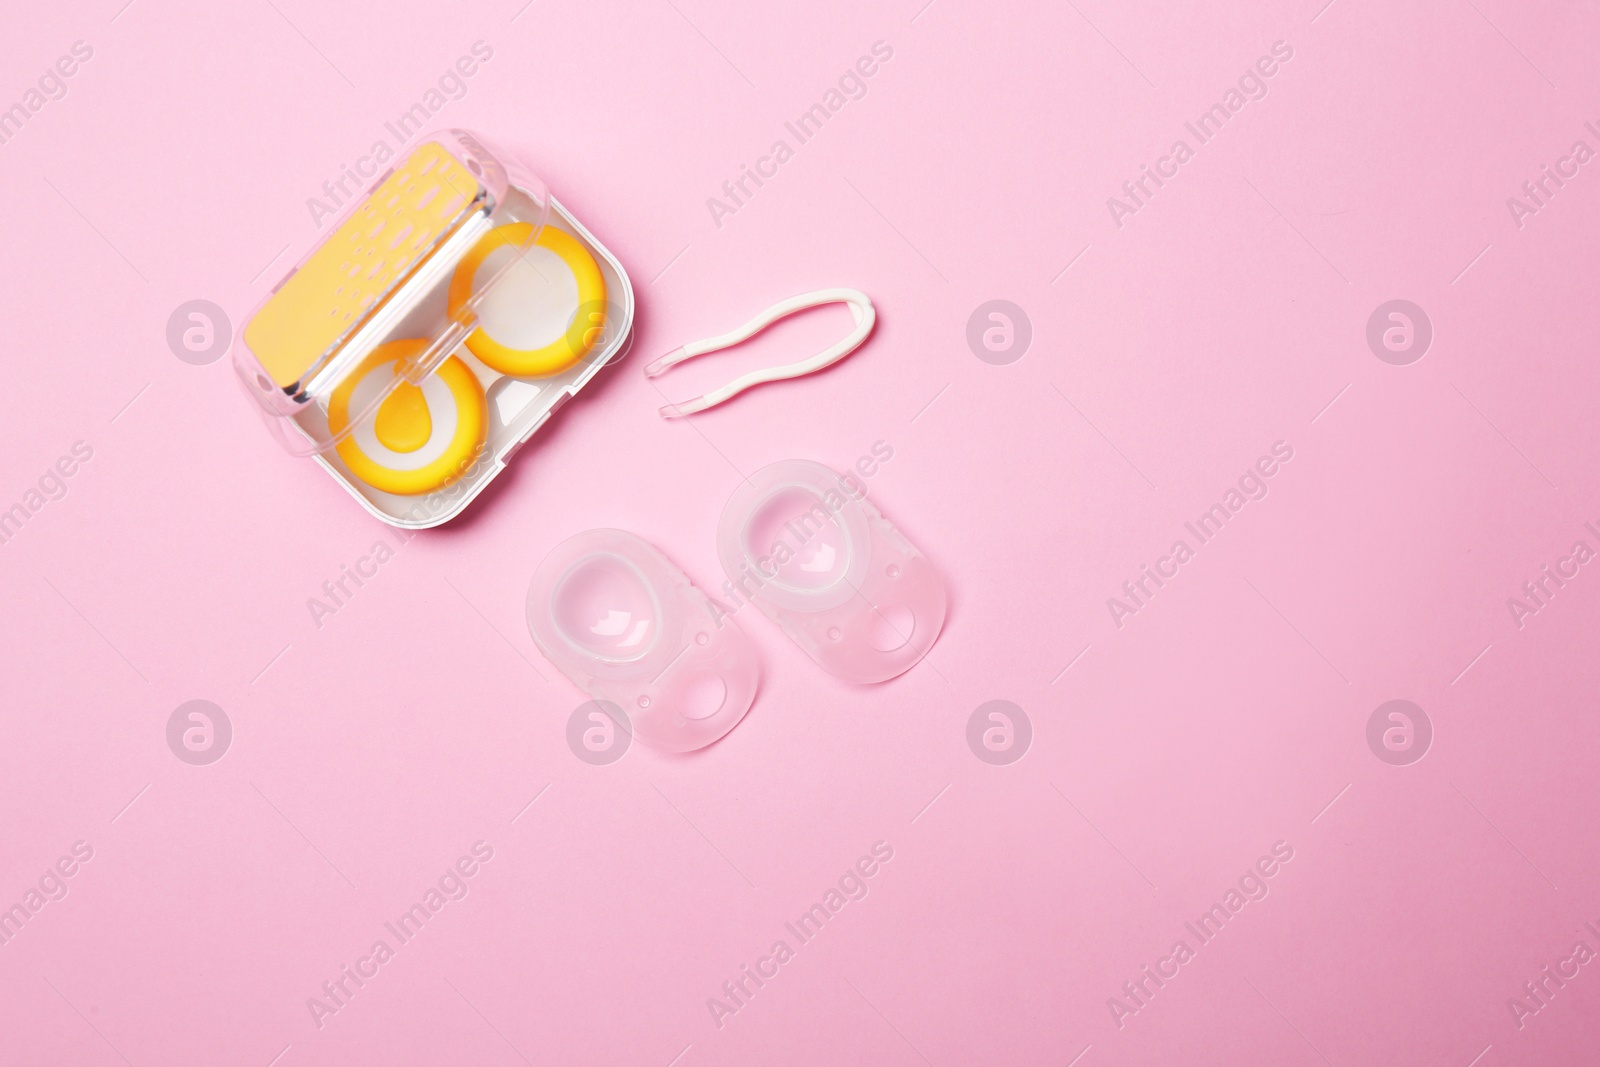 Photo of Flat lay composition with contact lenses and accessories on color background